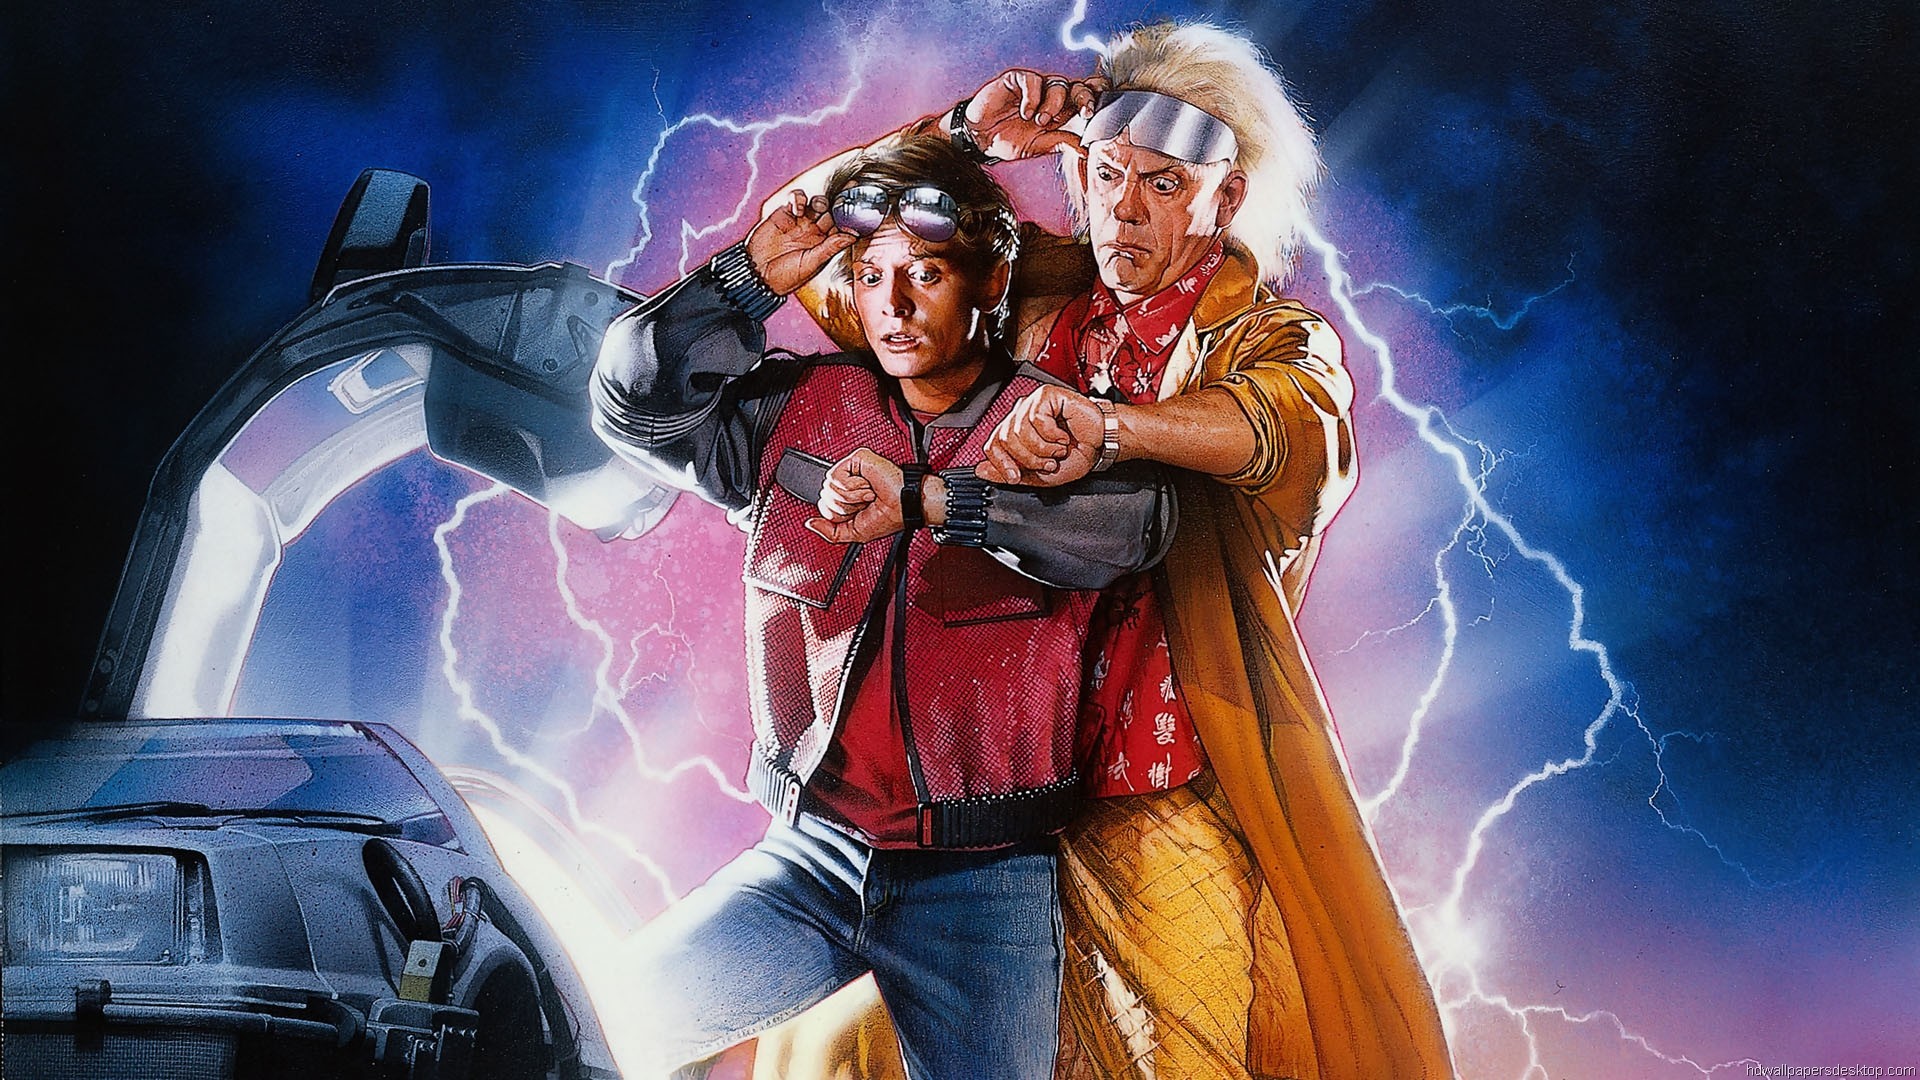 Back To The Future Science Fiction Science Fiction DeLorean Movies Time Travel Back To The Future Ch 1920x1080